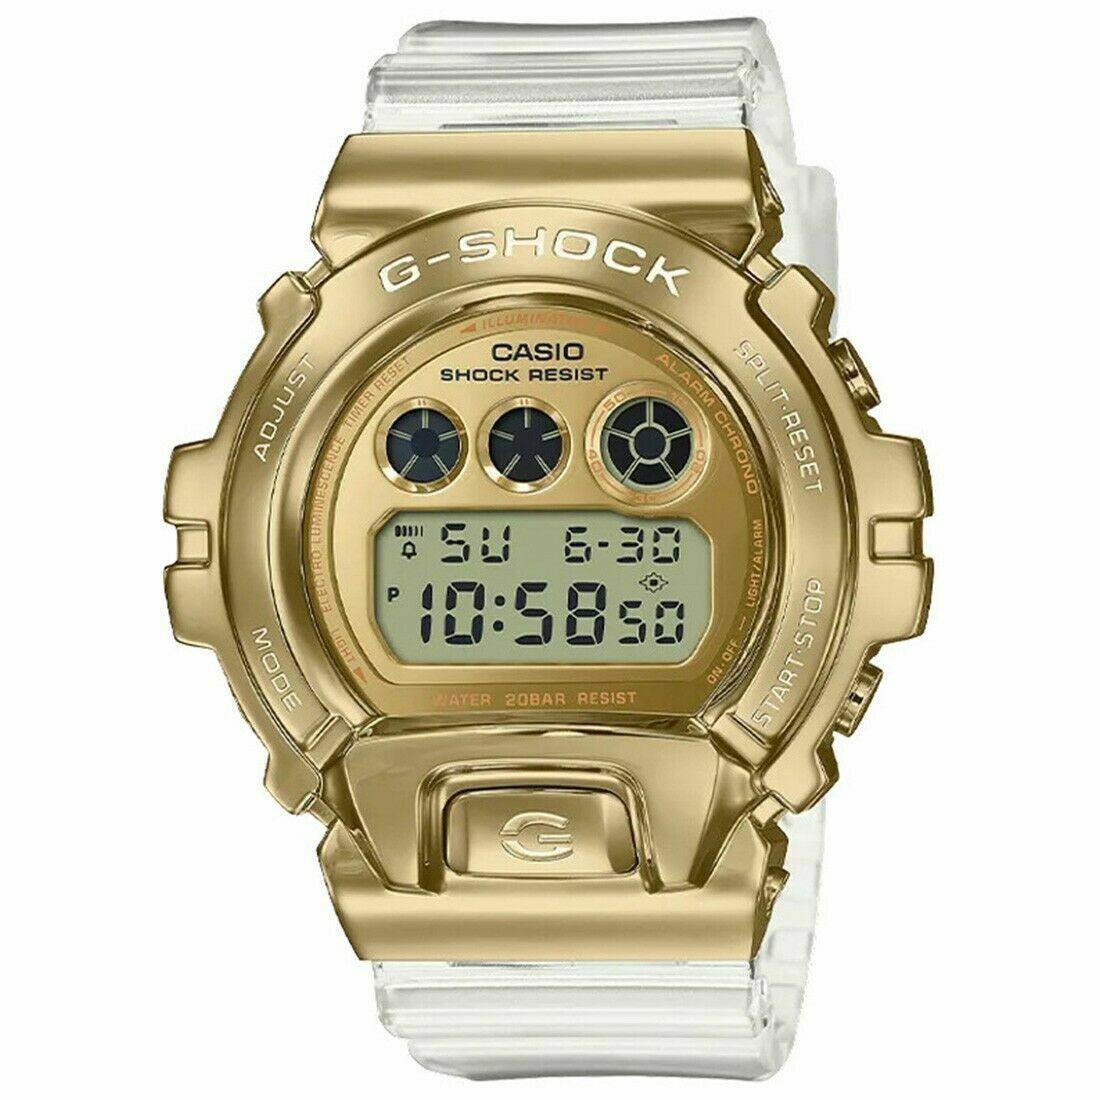 Casio G-shock Gold IP Limited Edition Metal Covered Watch GM6900SG-9